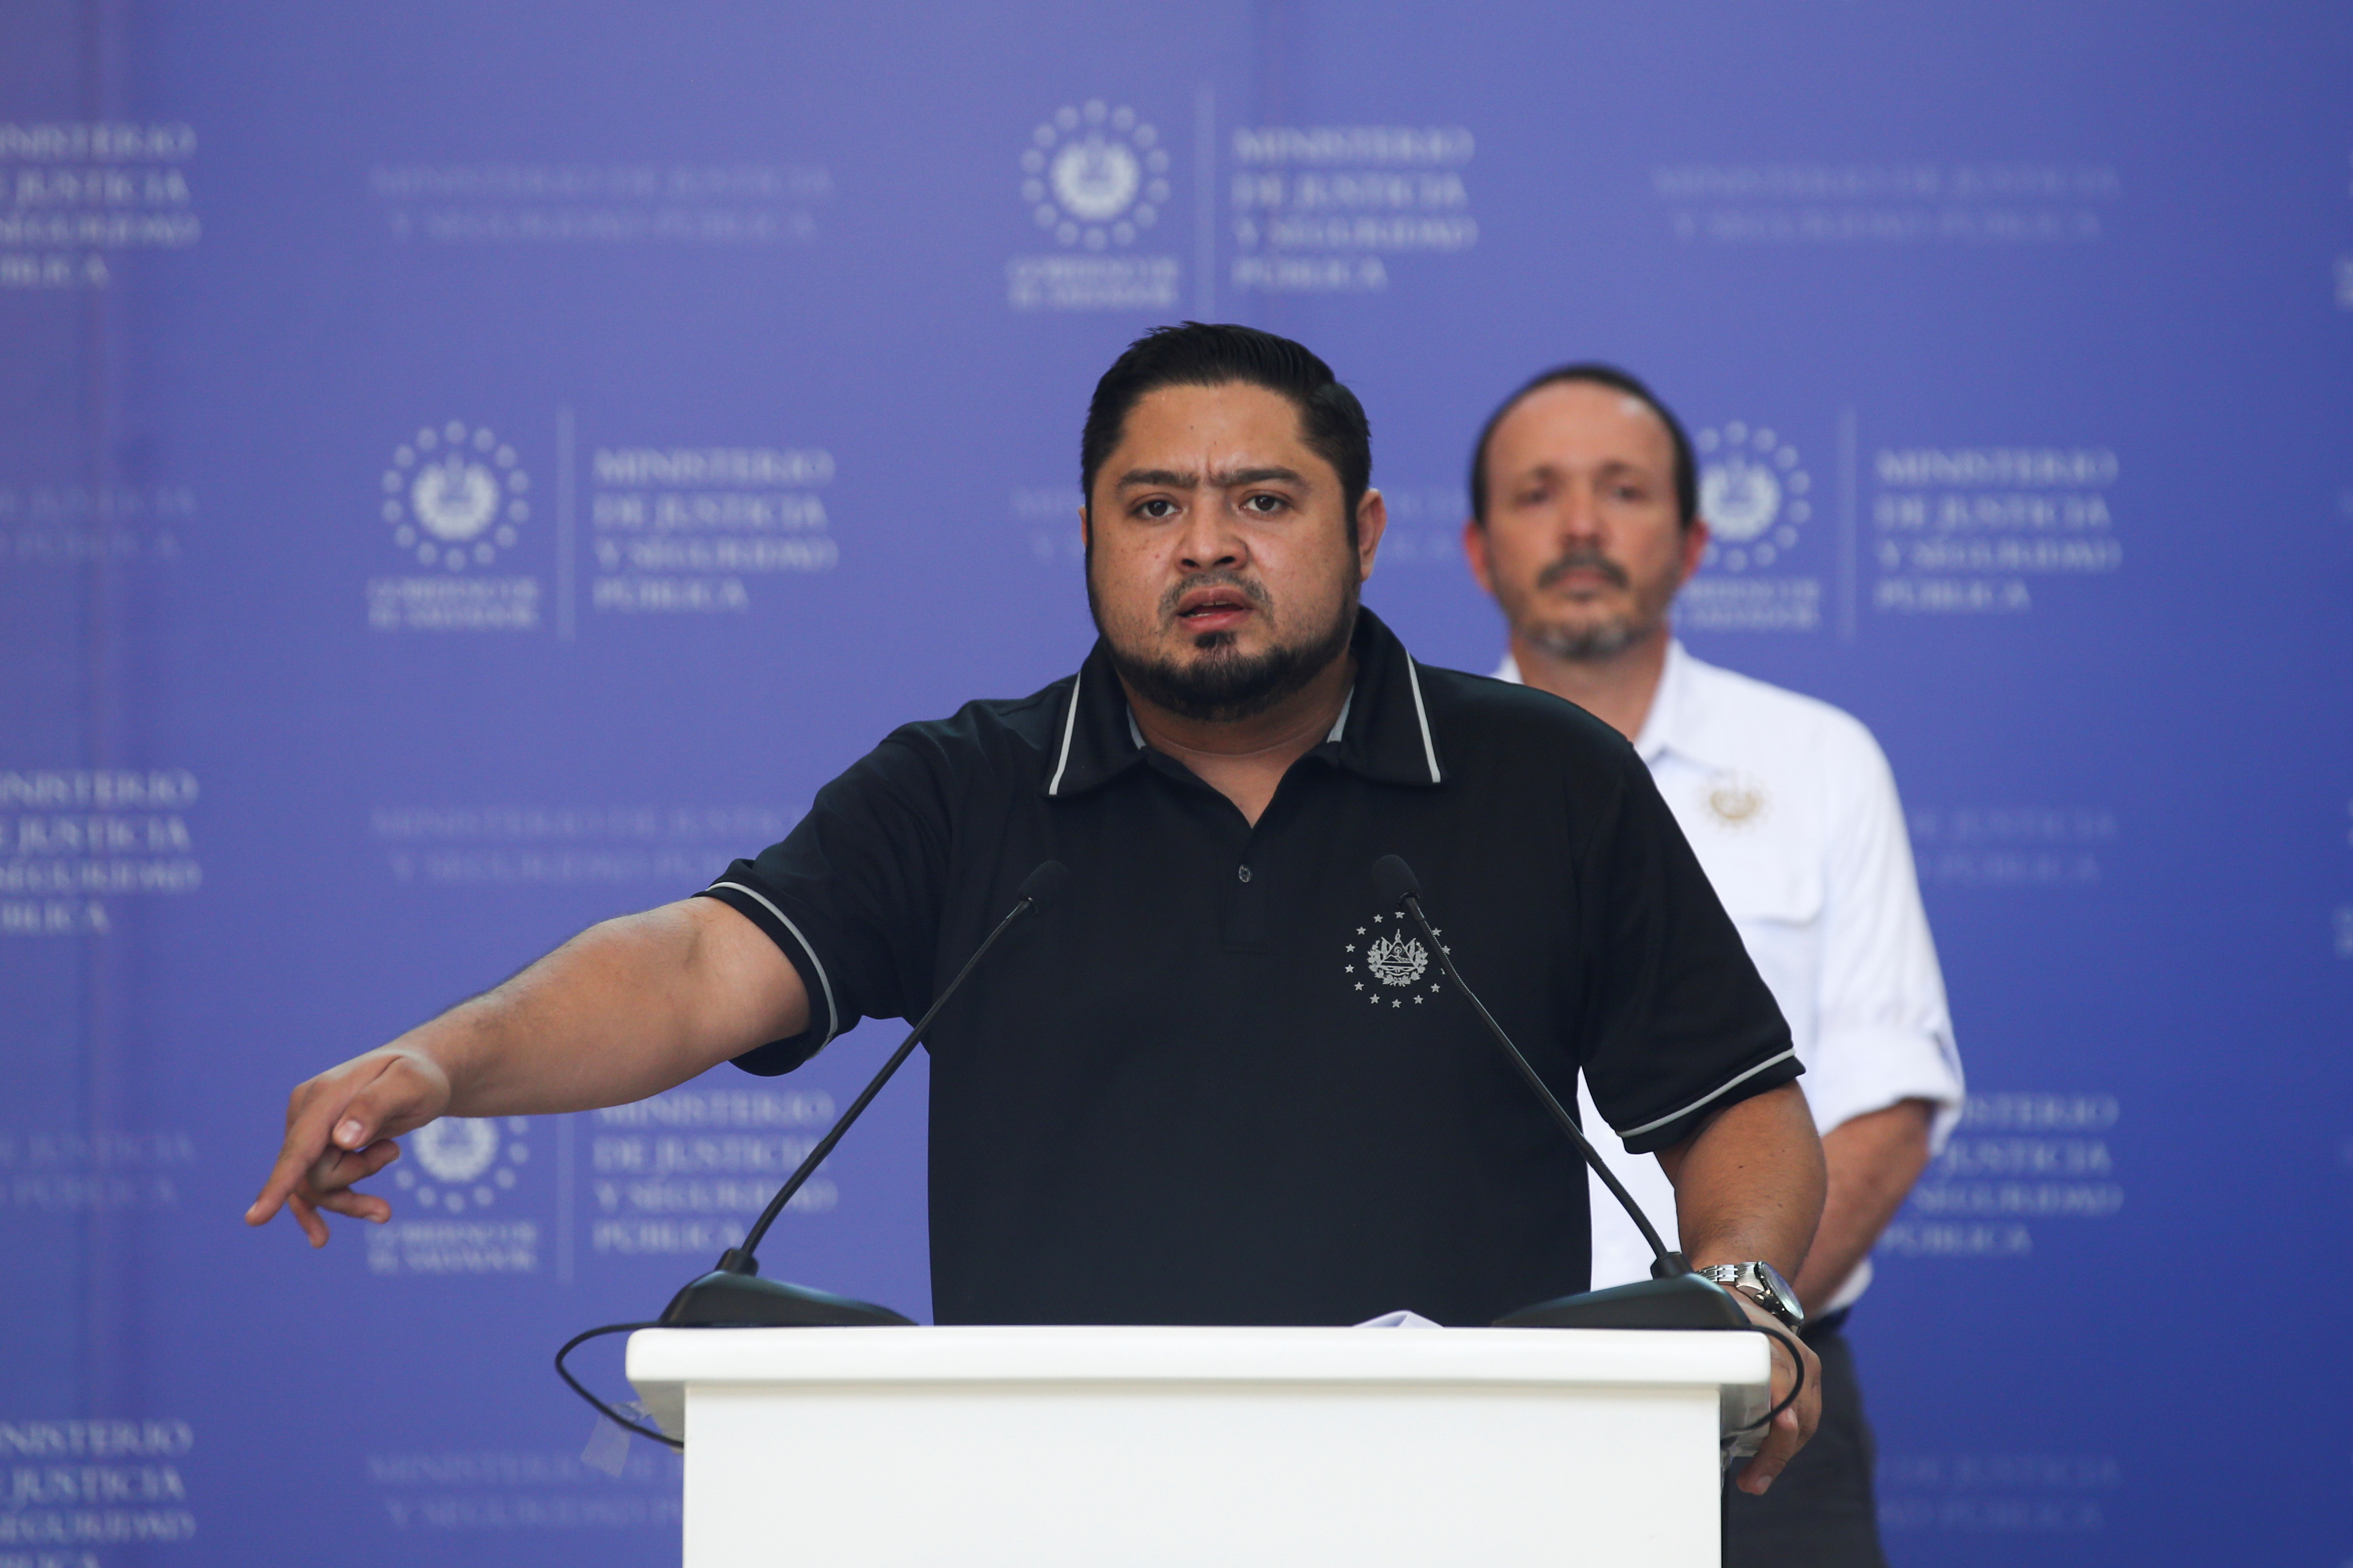 Chief of the Salvadoran Penal System and Vice Minister of Justice and Public Security Osiris Luna Meza speaks during the inauguration of the new cell area, in Ayutuxtepeque